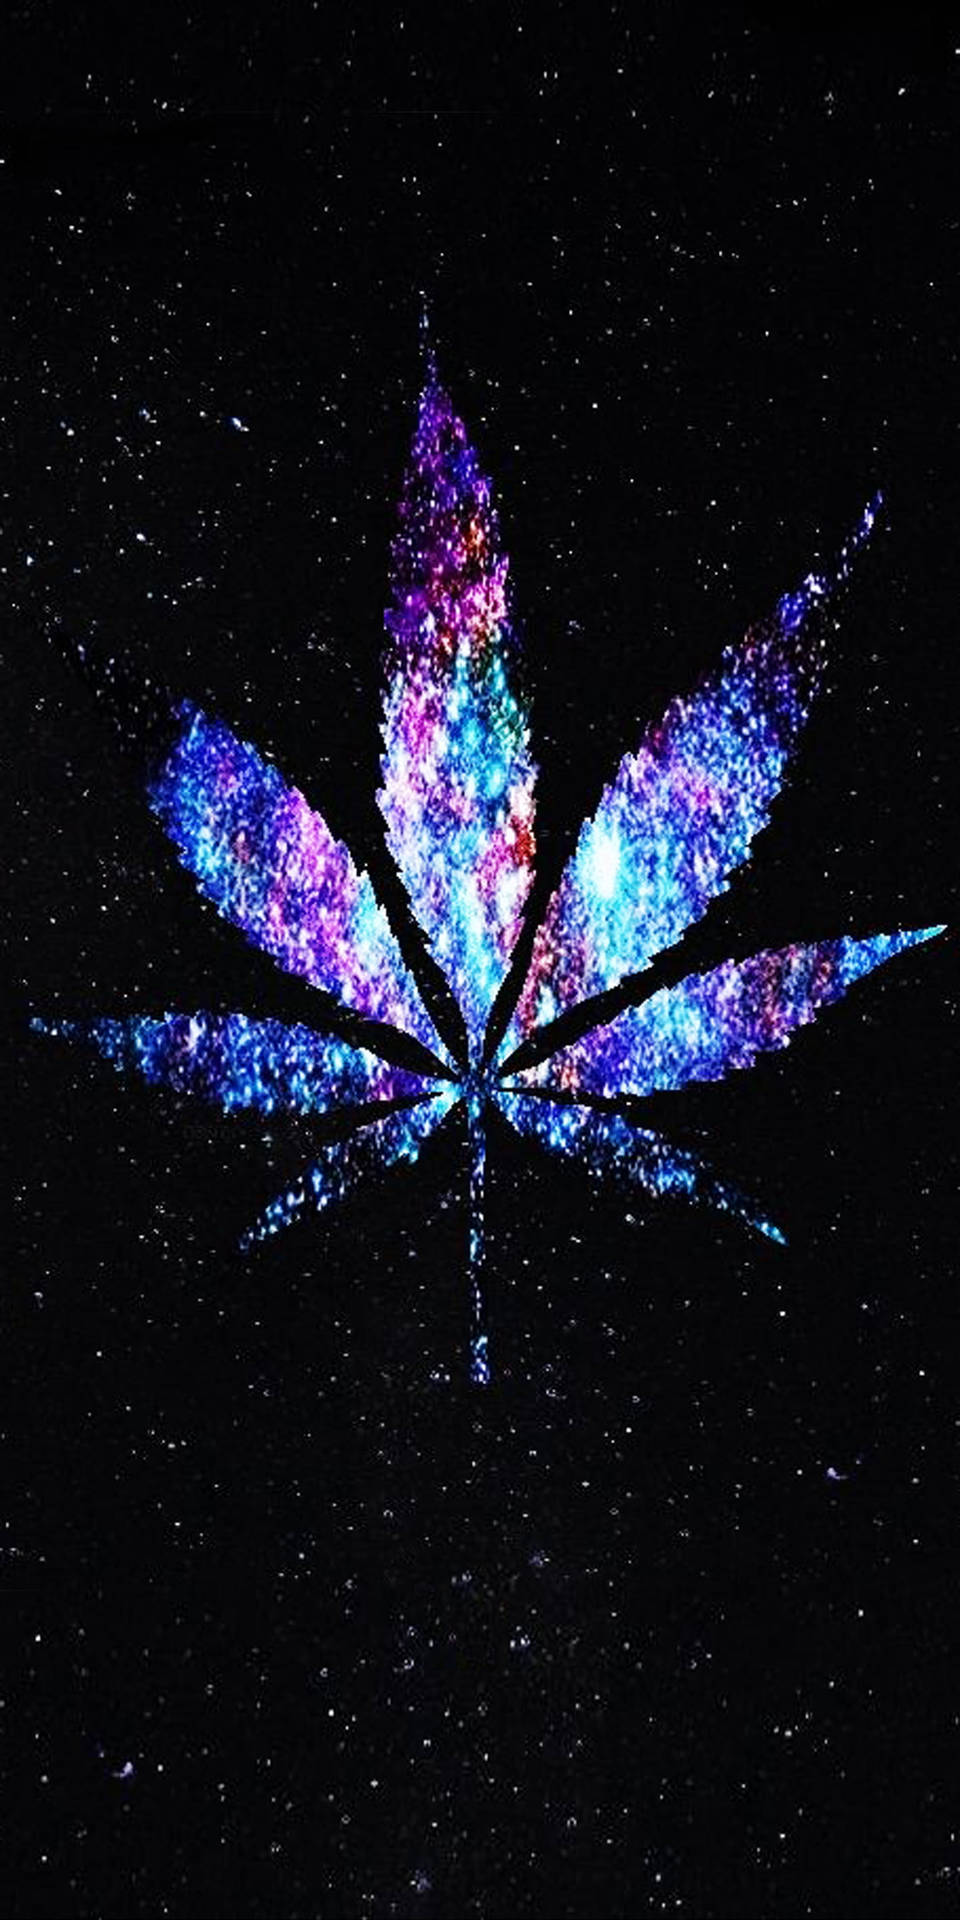 Universe-like Weed Leaf Graphic With Stars Wallpaper